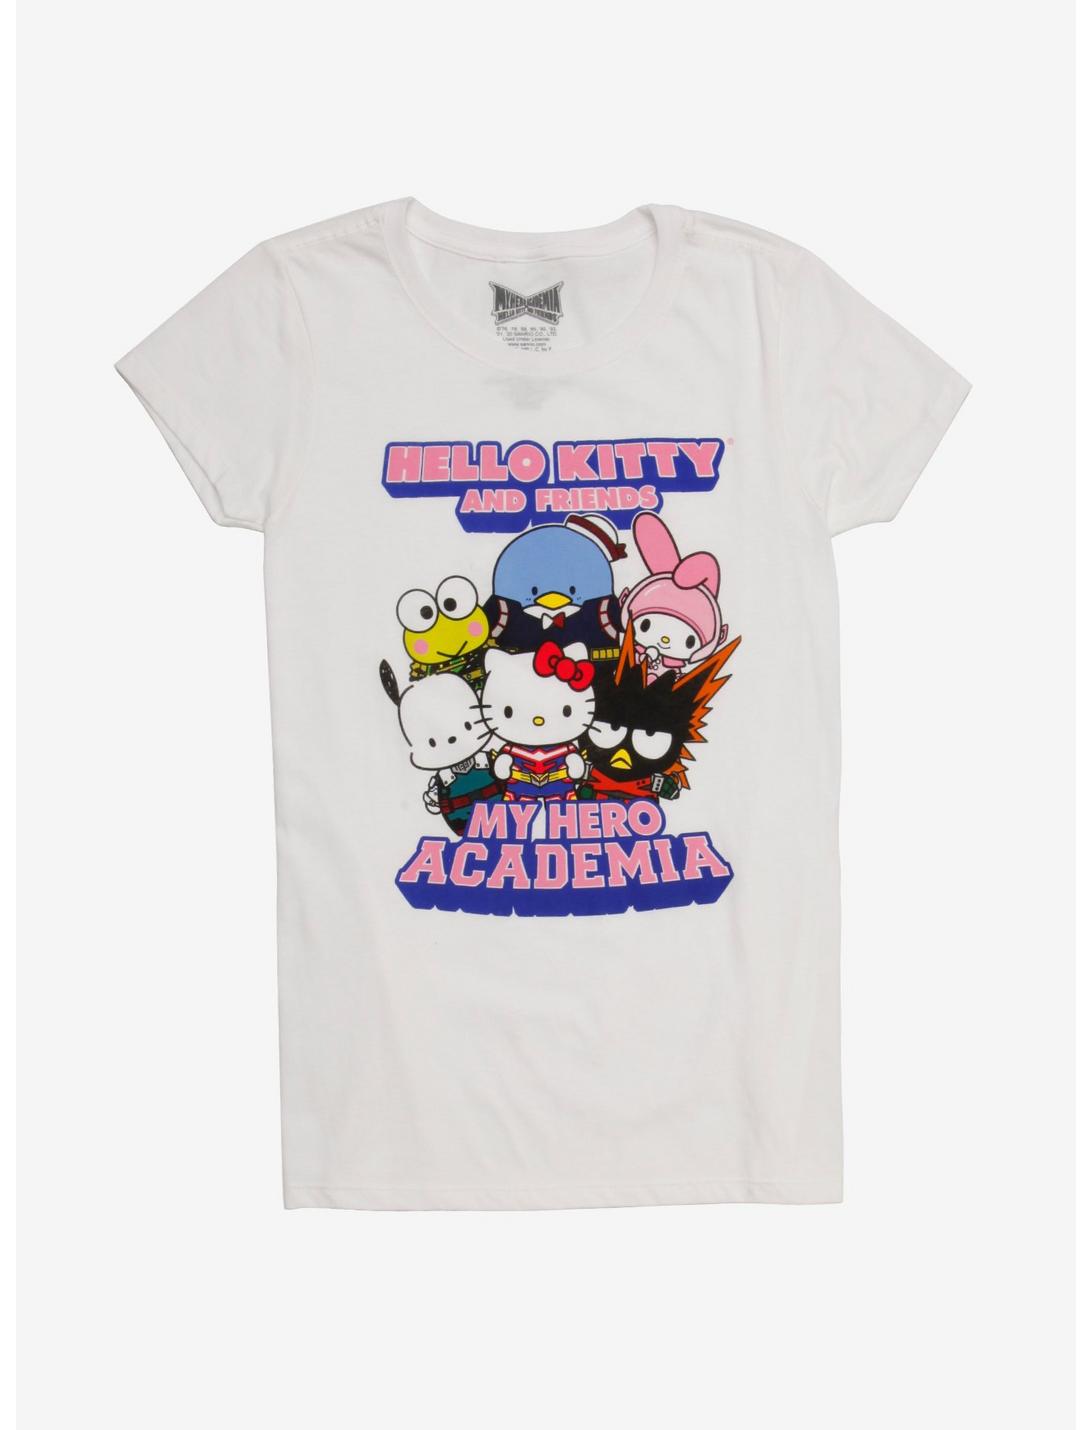 My Hero Academia X Hello Kitty And Friends Group Girls T-Shirt Plus Size, MULTI, hi-res